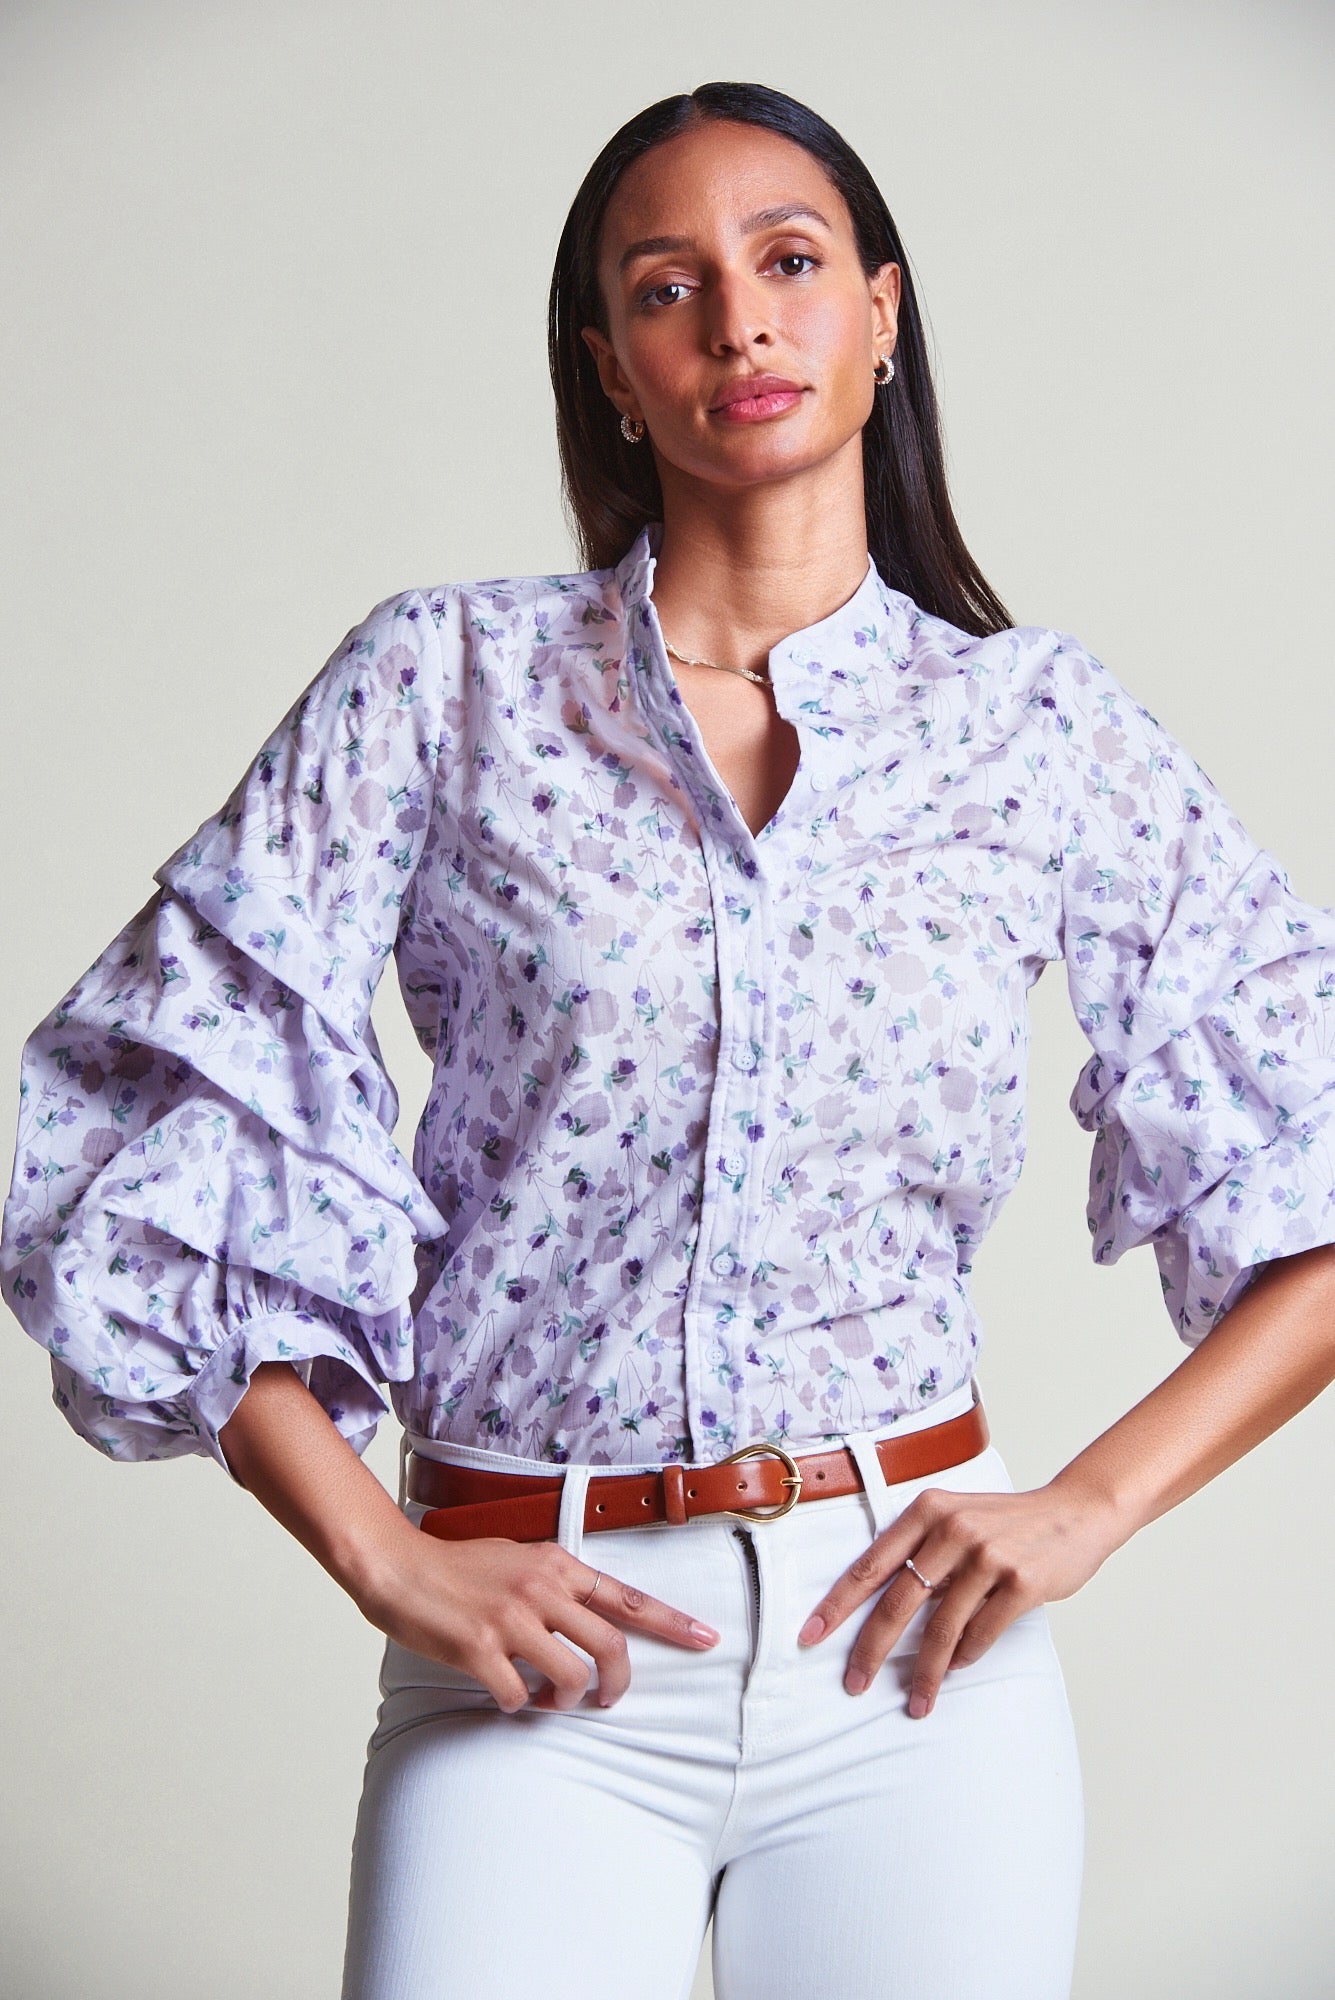 The Shirt by Rochelle Behrens  Perfect Fitting Shirts for Women